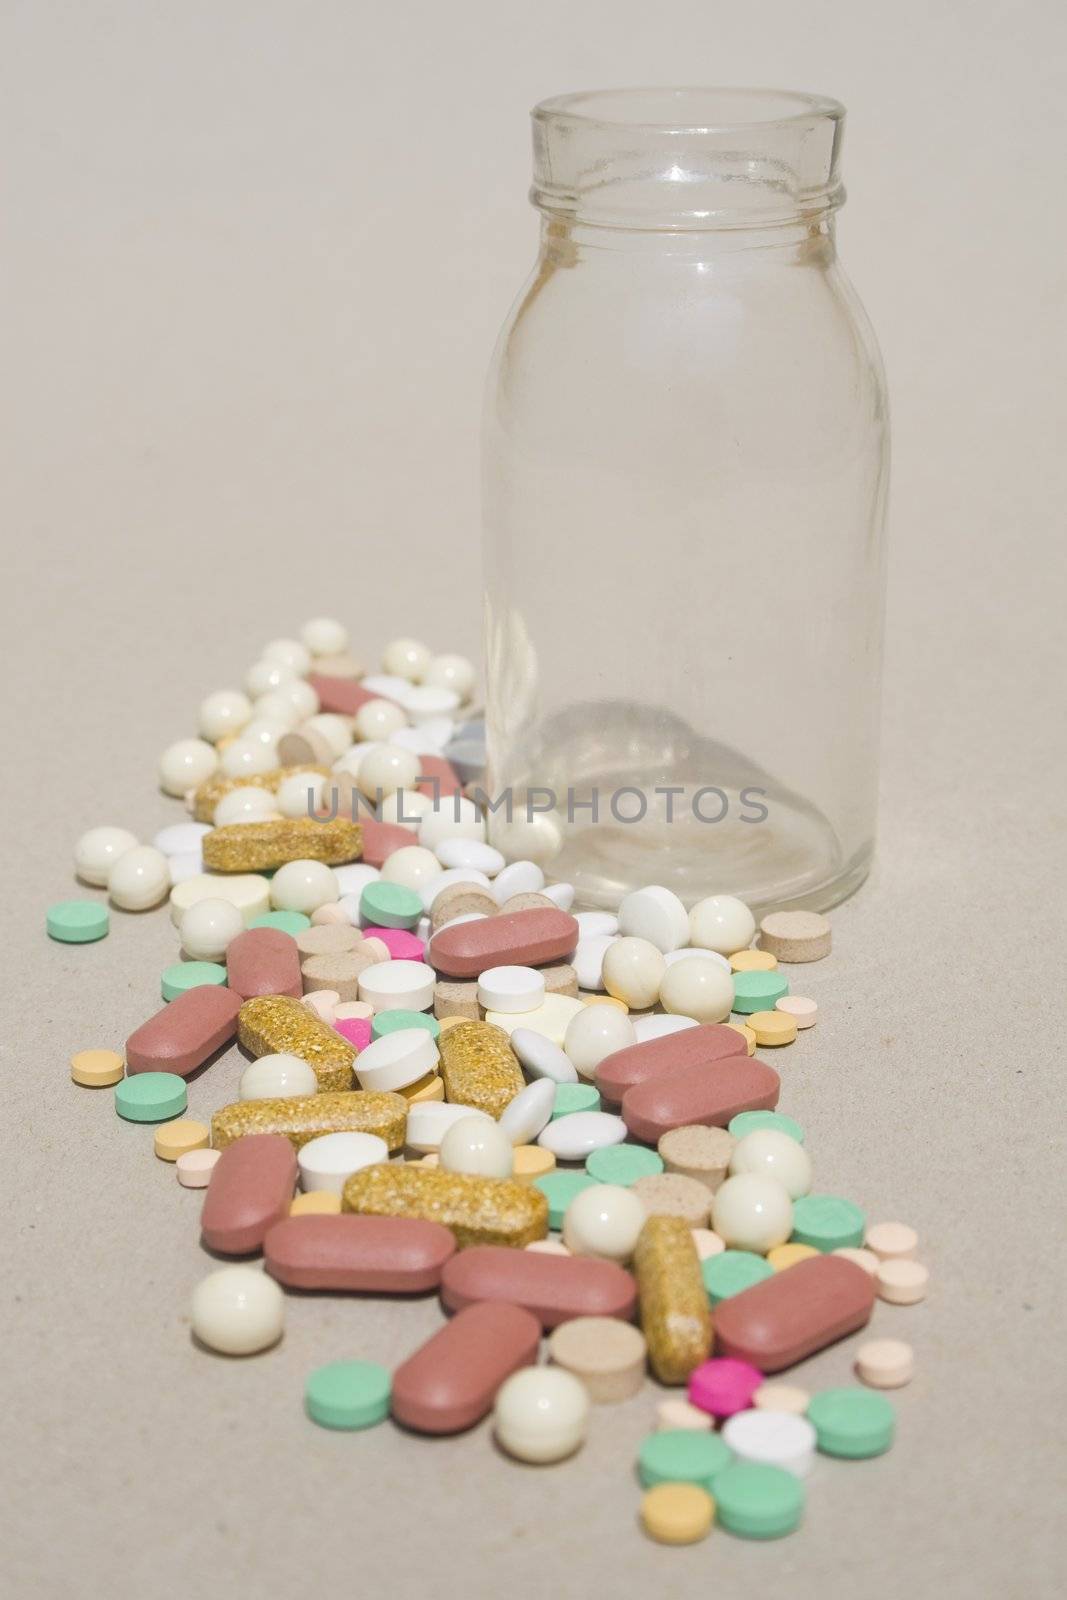 Empty glass bottle and pile of spilled pills